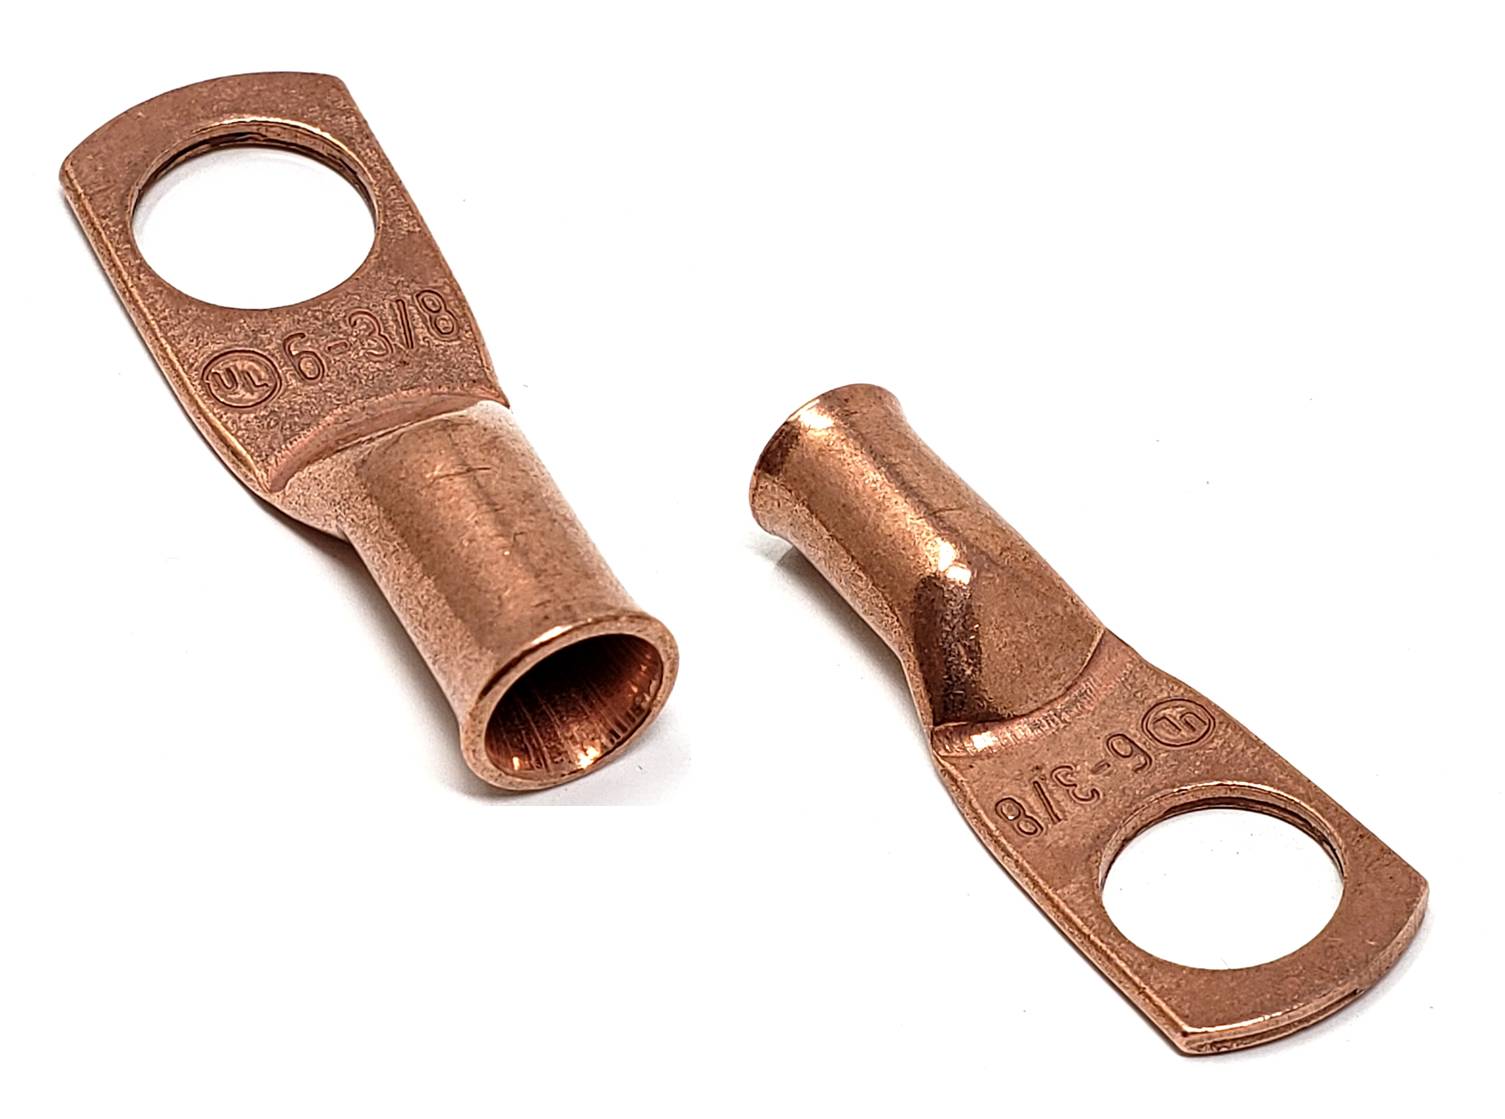 6 Gauge (AWG) Pure Copper Cable Lug Connector Ring Terminals